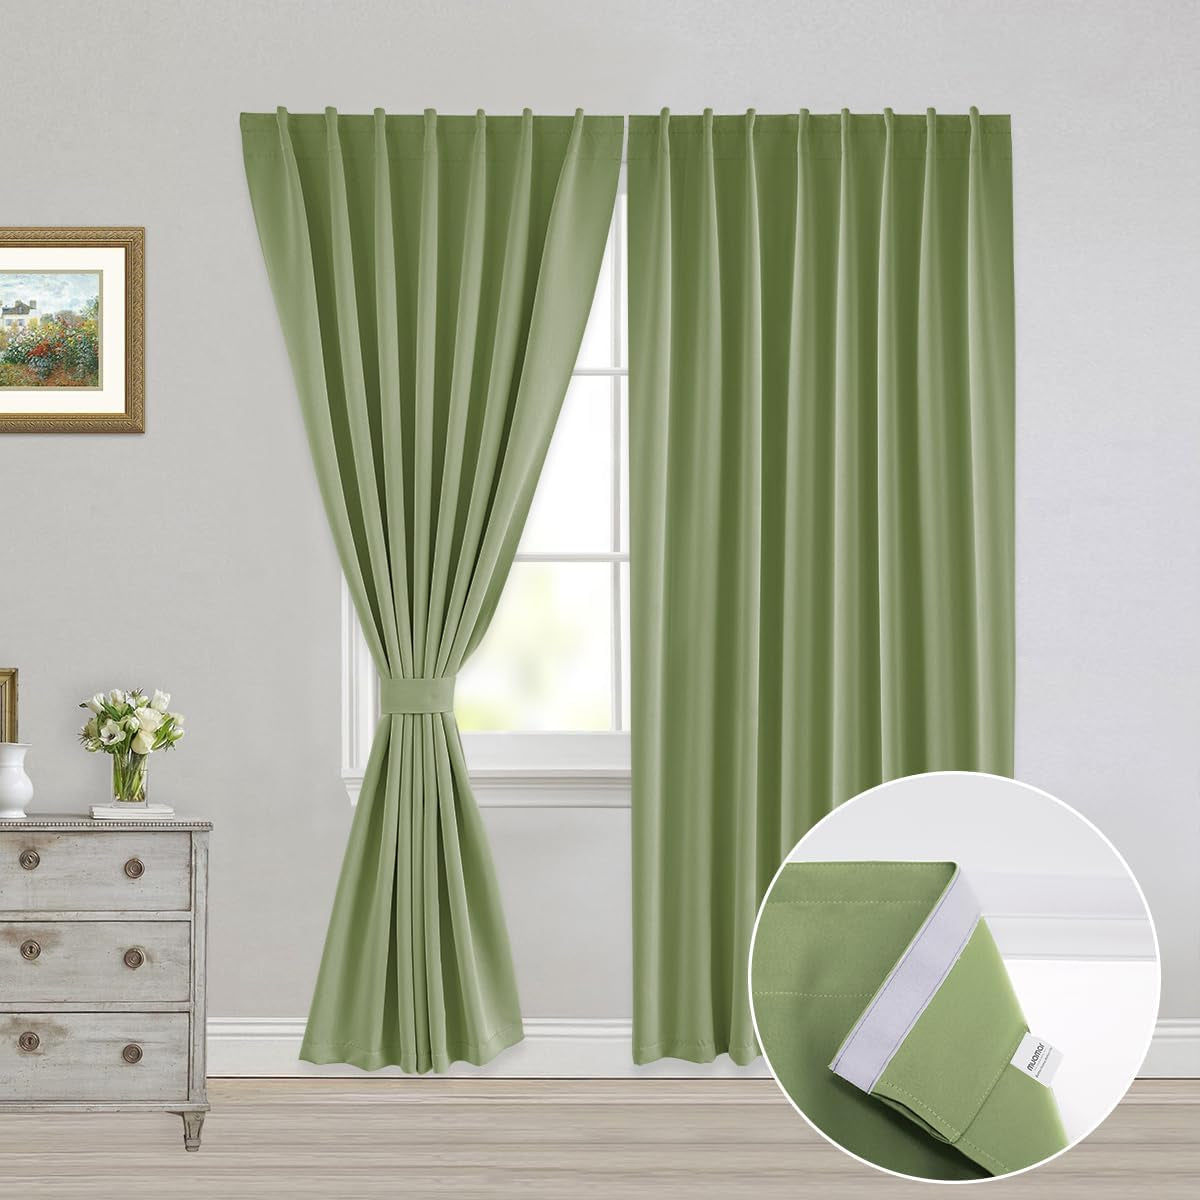 Muamar 2Pcs Blackout Curtains Privacy Curtains 63 Inch Length Window Curtains,Easy Install Thermal Insulated Window Shades,Stick Curtains No Rods, Black 42" W X 63" L  Muamar Sage Green 52"W X 84"L 